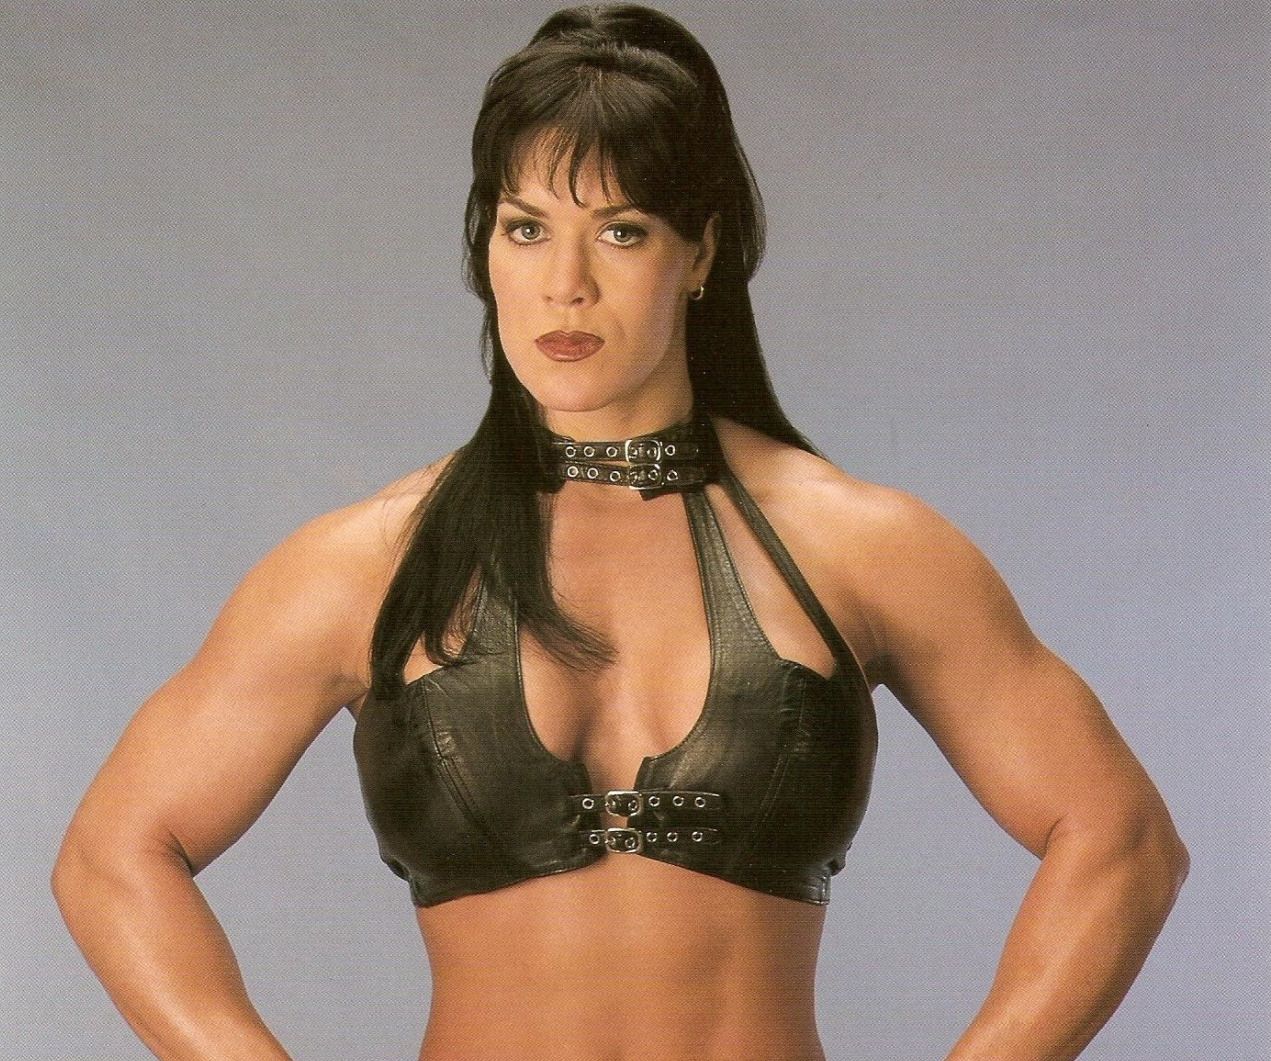 Hot Photo Of Chyna You NEED To See